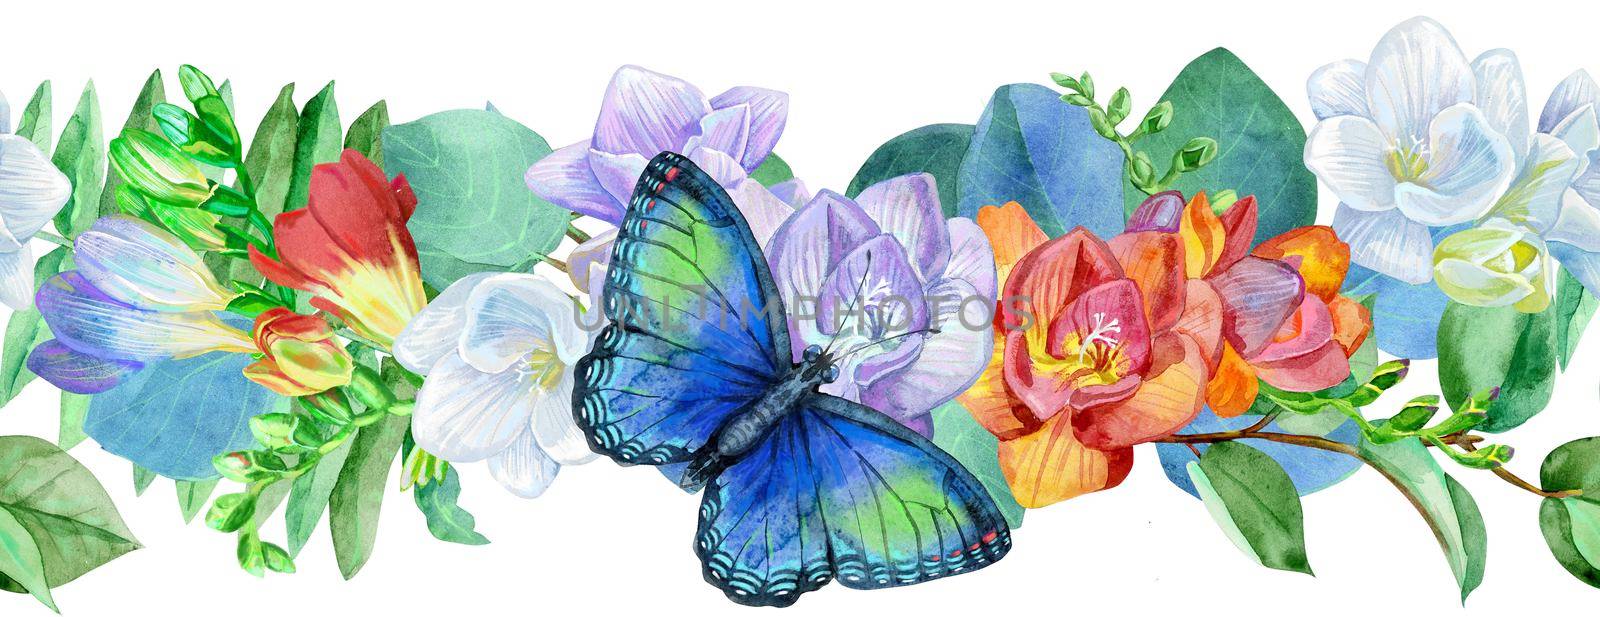 Seamless floral border with blue butterfly and freesia on white background. Artistic design for floral print for packaging, textile, wallpaper, gift wrap, greeting or wedding background.